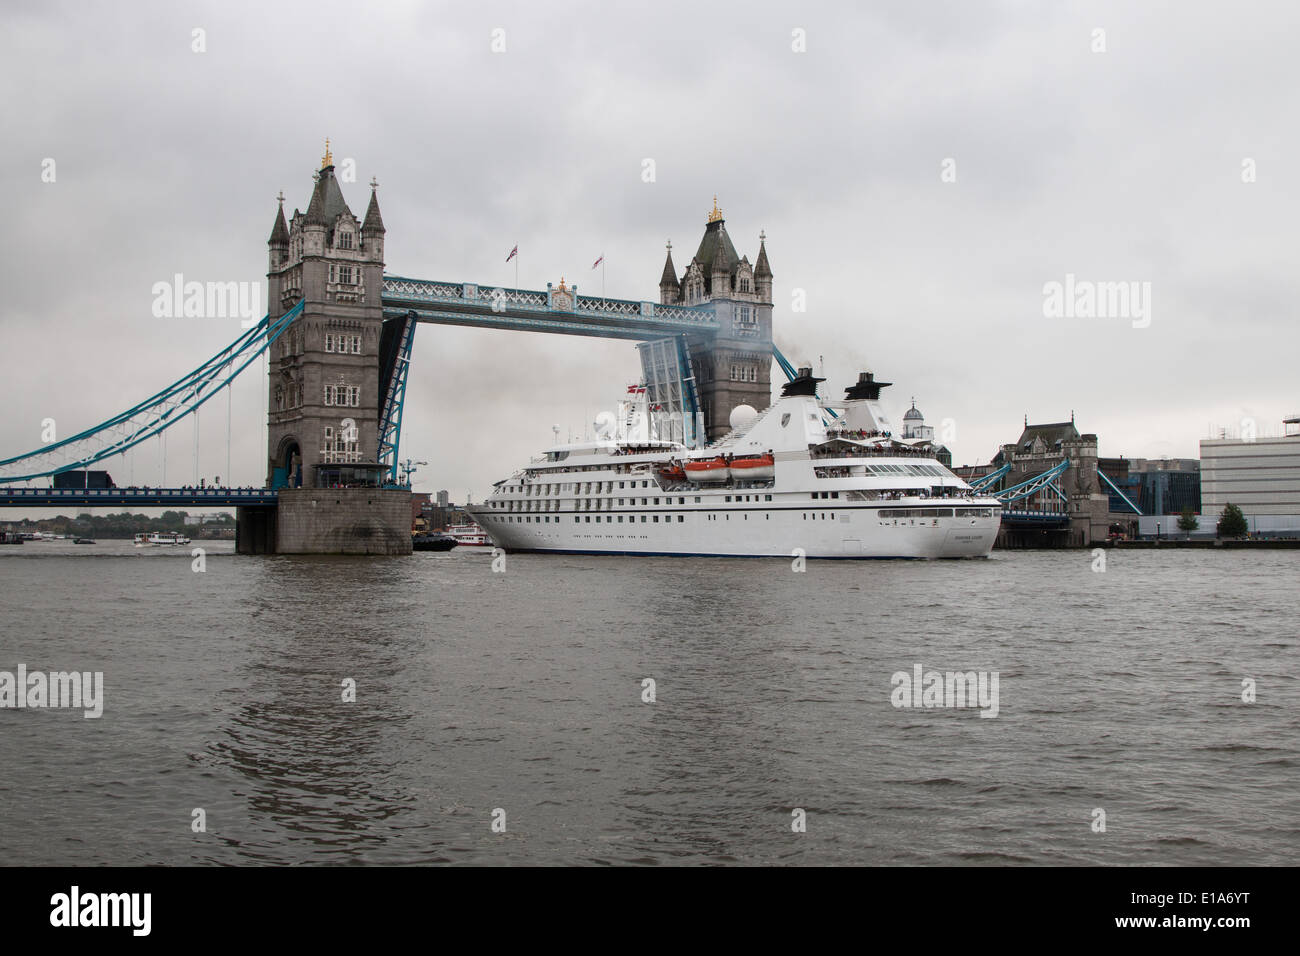 London, UK. 28th May 2014. The cruise ship Seabourn Legend passes through Tower Bridge on its way to moor alongside HMS Belfast on the Thames Credit:  Steve Bright/Alamy Live News Stock Photo